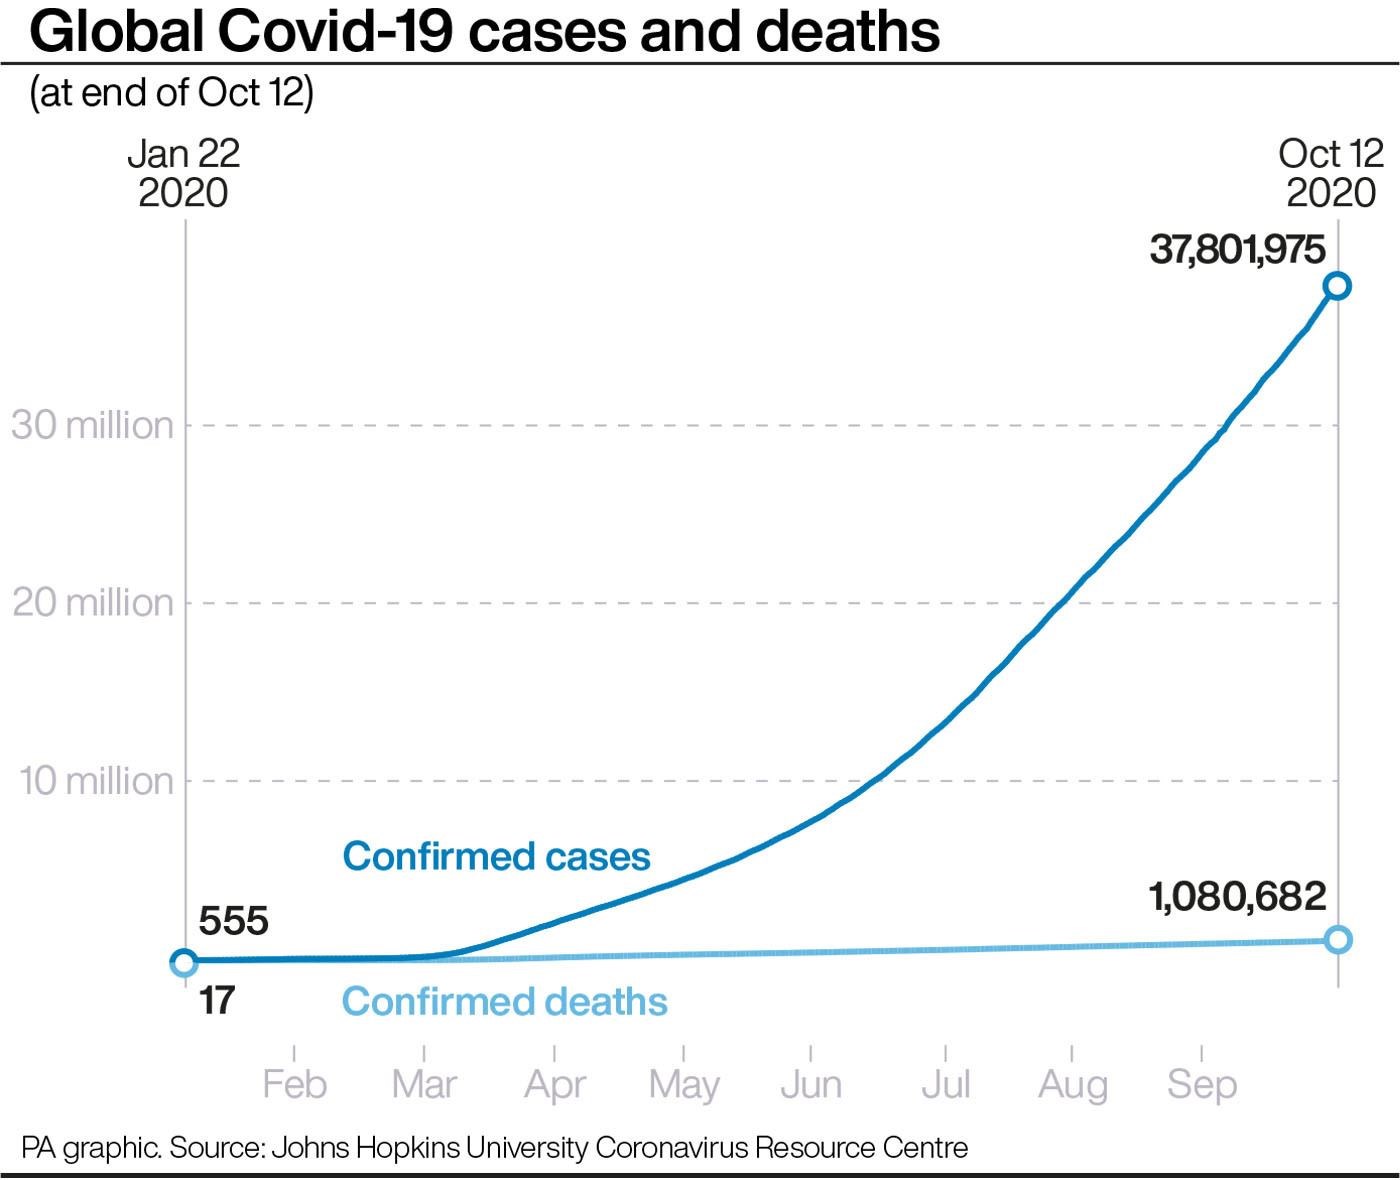 Global Covid-19 cases and deaths (PA Graphics)